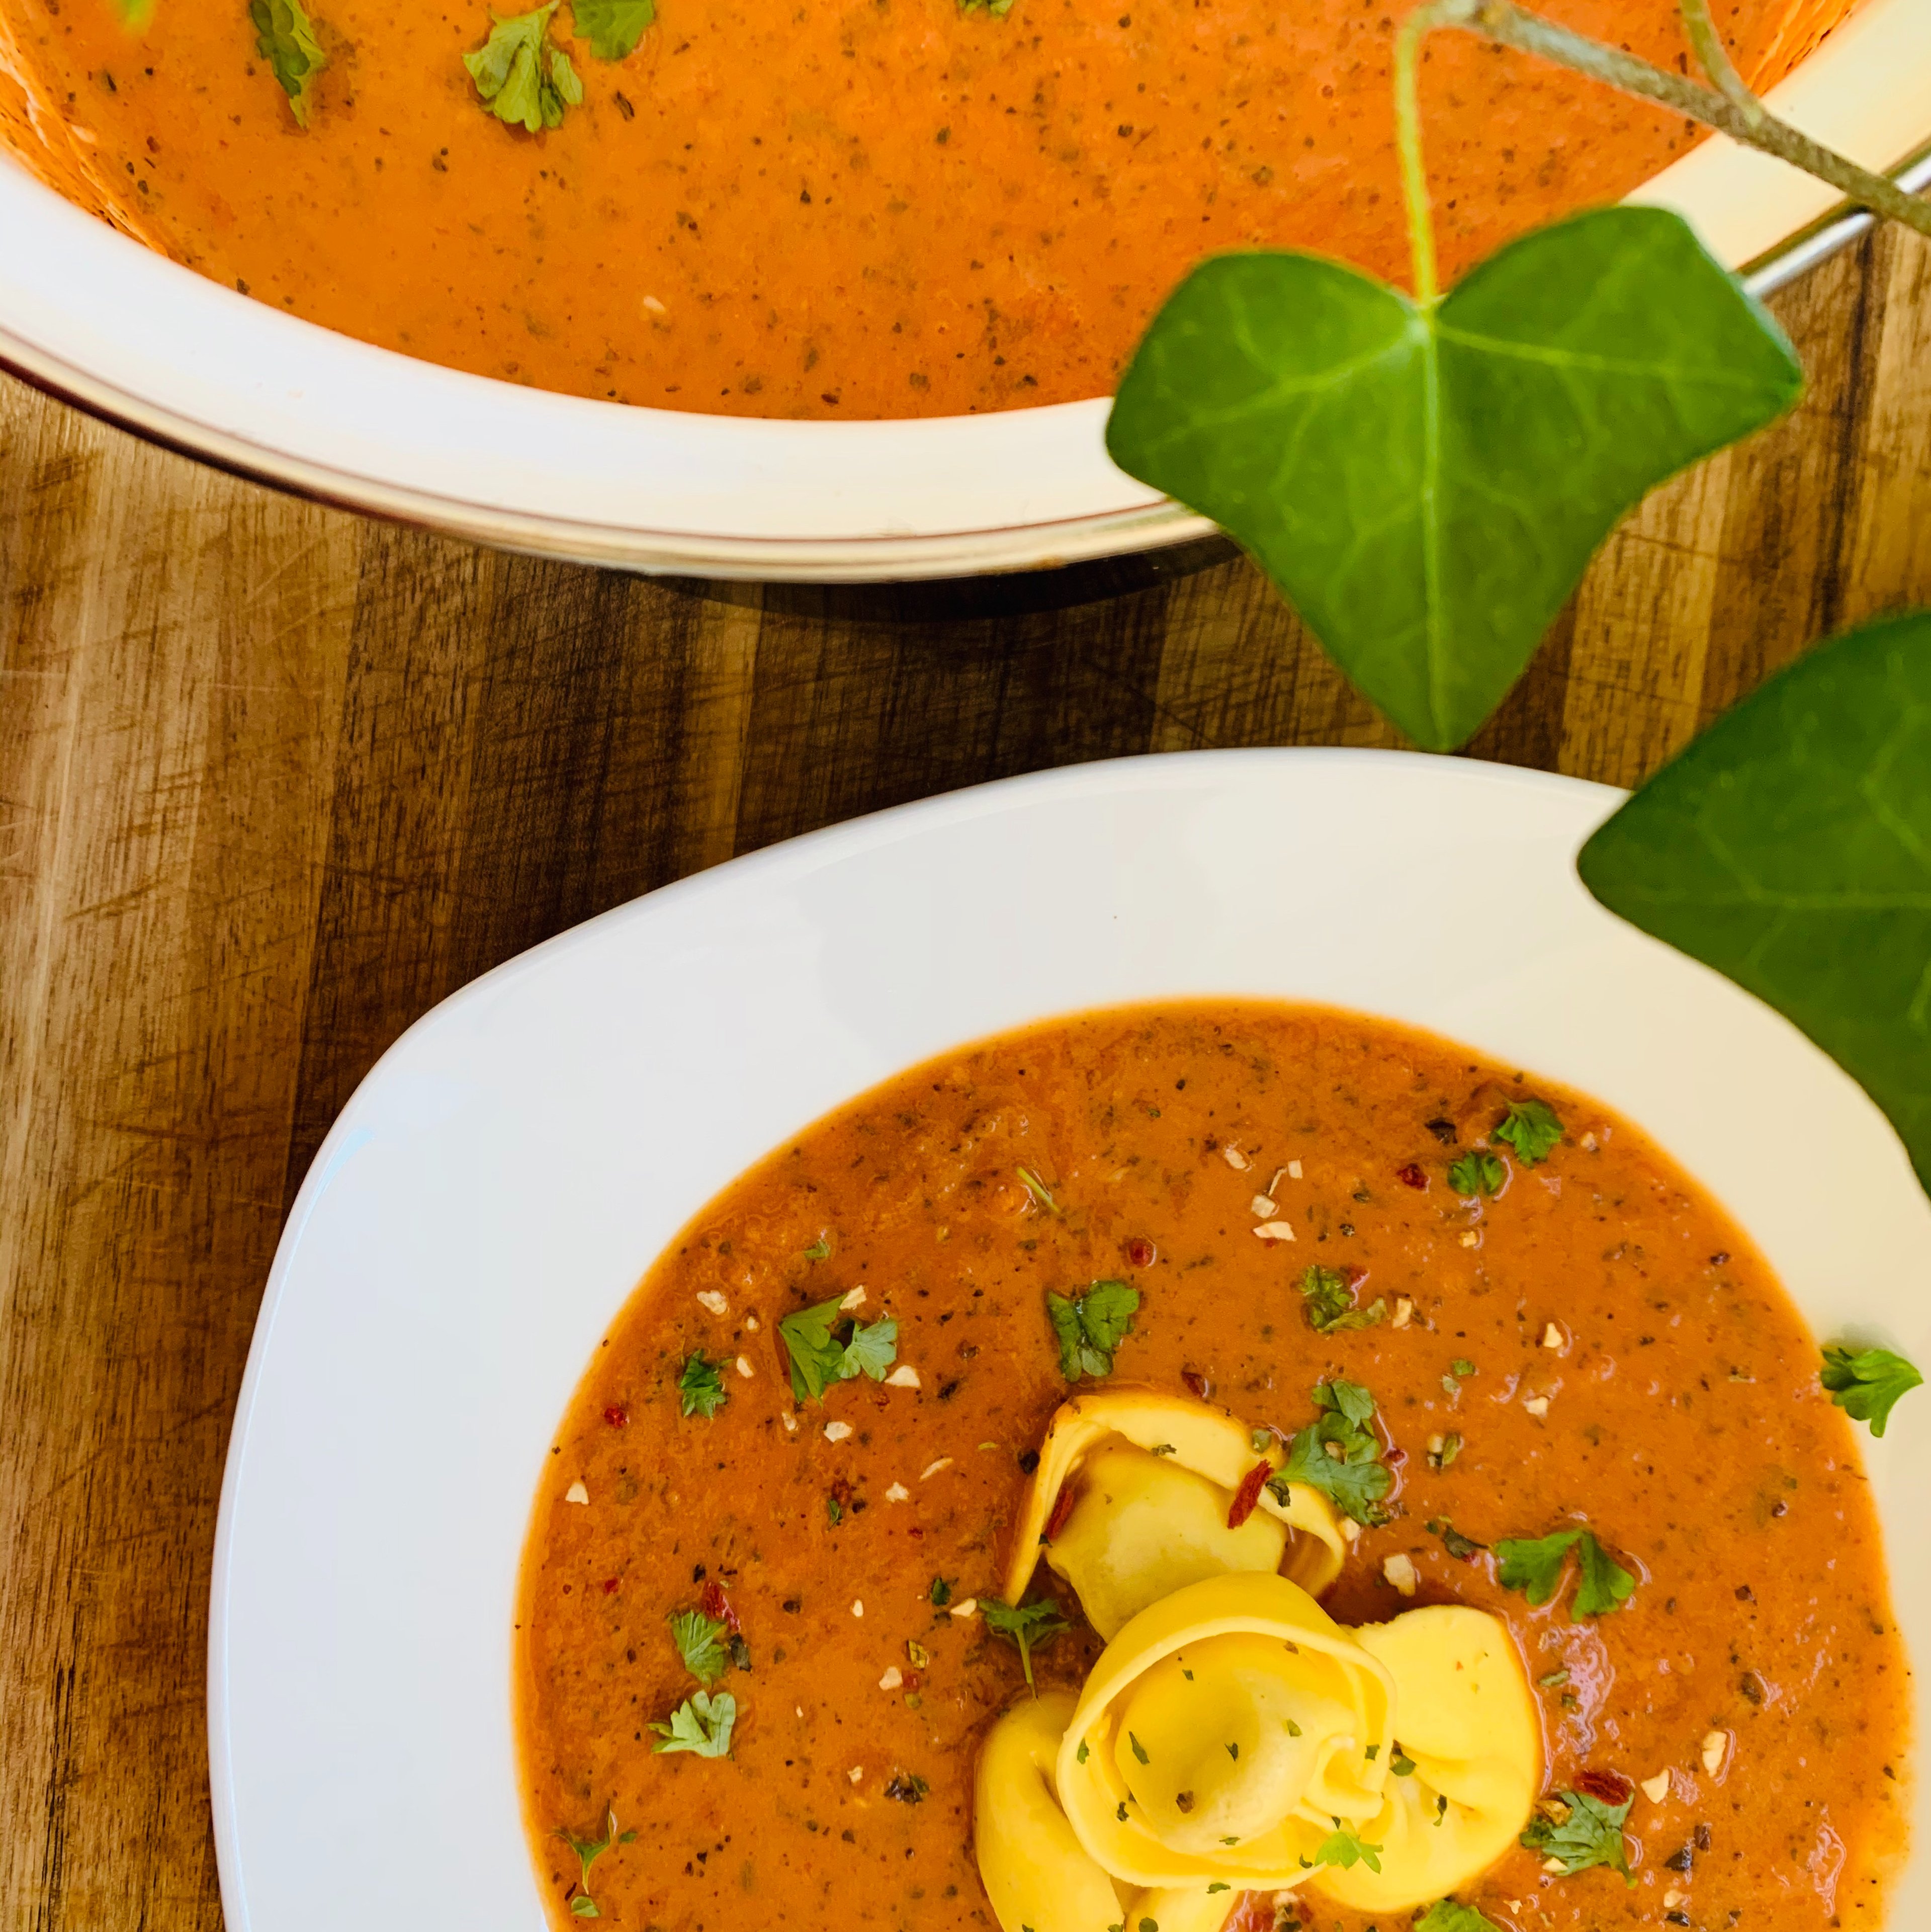 Tomato soup with tortellini topping